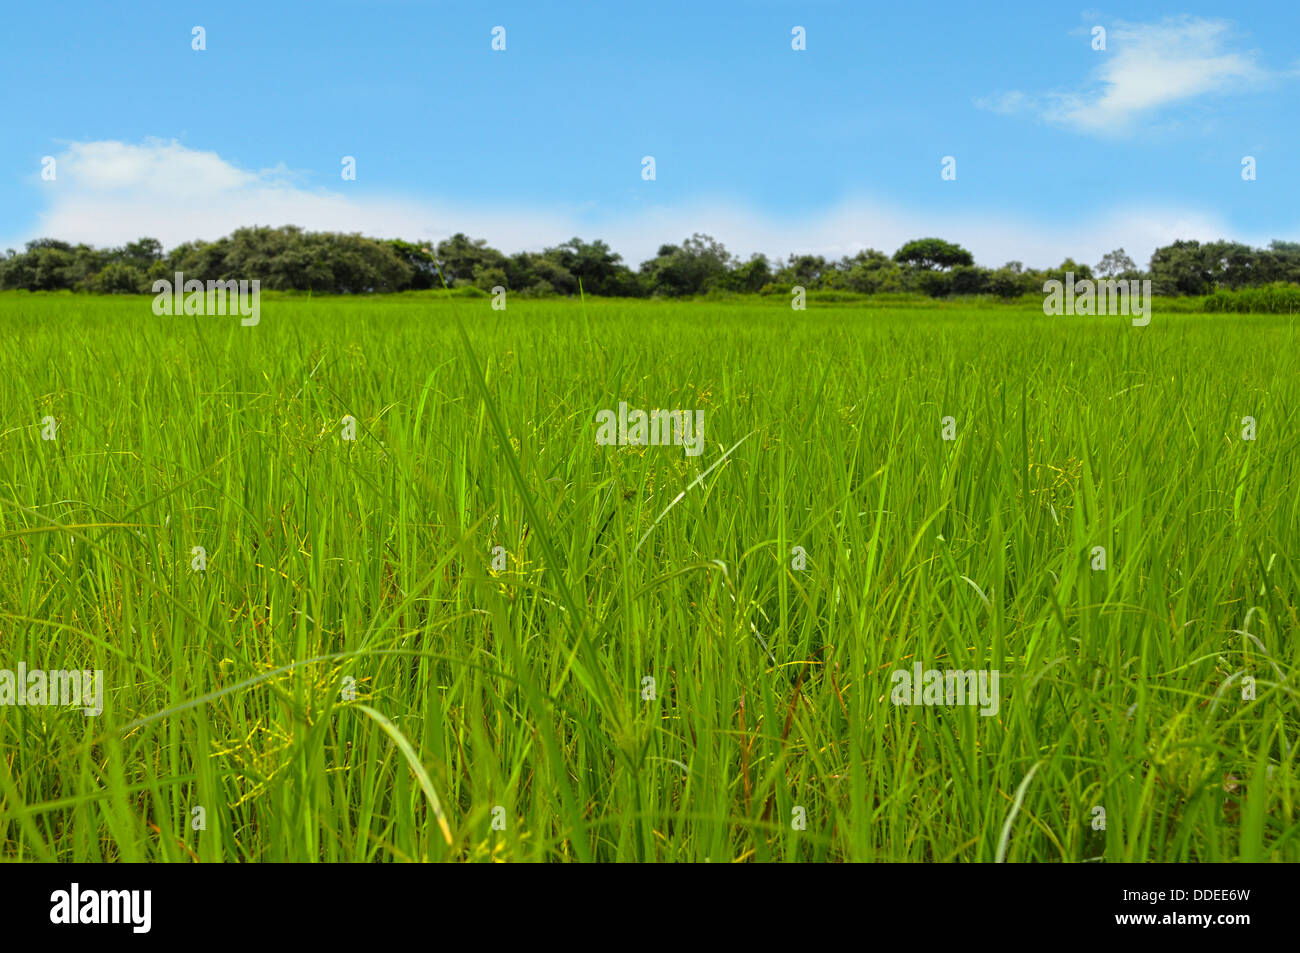 Beautiful grass meadow with a bright blue sky Stock Photo